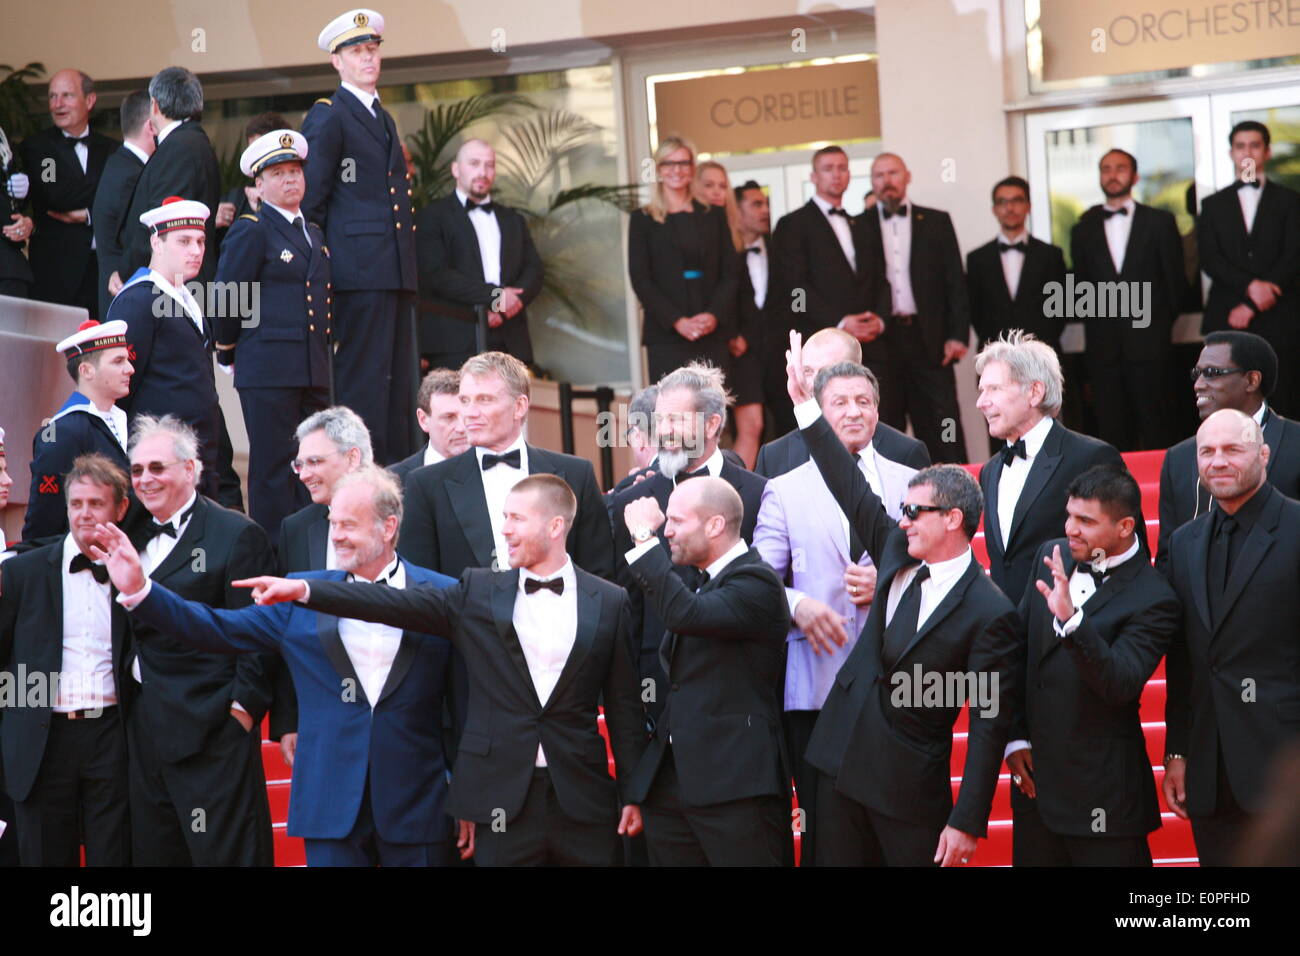 Cannes, France. 18th May, 2014. Dolph Lundgren, Harrison Ford, Patrick Hughes, Antonio Banderas, Mel Gibson, Jason Statham, Sylvester Stallone, Ronda Rousey, Wesley Snipes and Kellan Lutz at the The Expendables 3 red carpet at the 67th Cannes Film Festival France. Sunday 18th May 2014 in Cannes Film Festival, France. Credit:  Doreen Kennedy/Alamy Live News Stock Photo